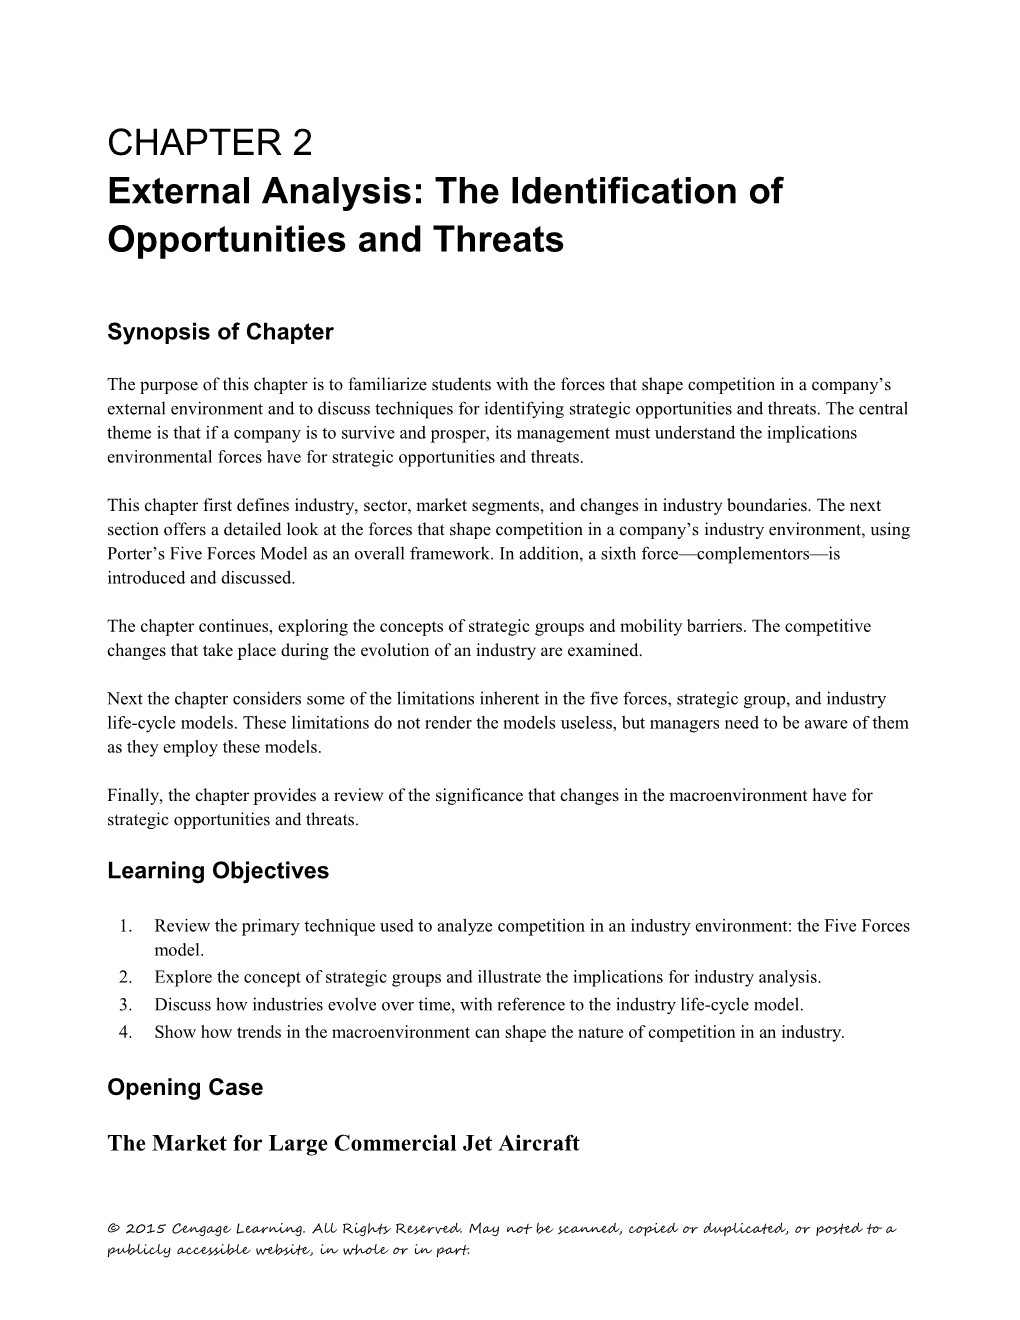 External Analysis: the Identification of Opportunities and Threats